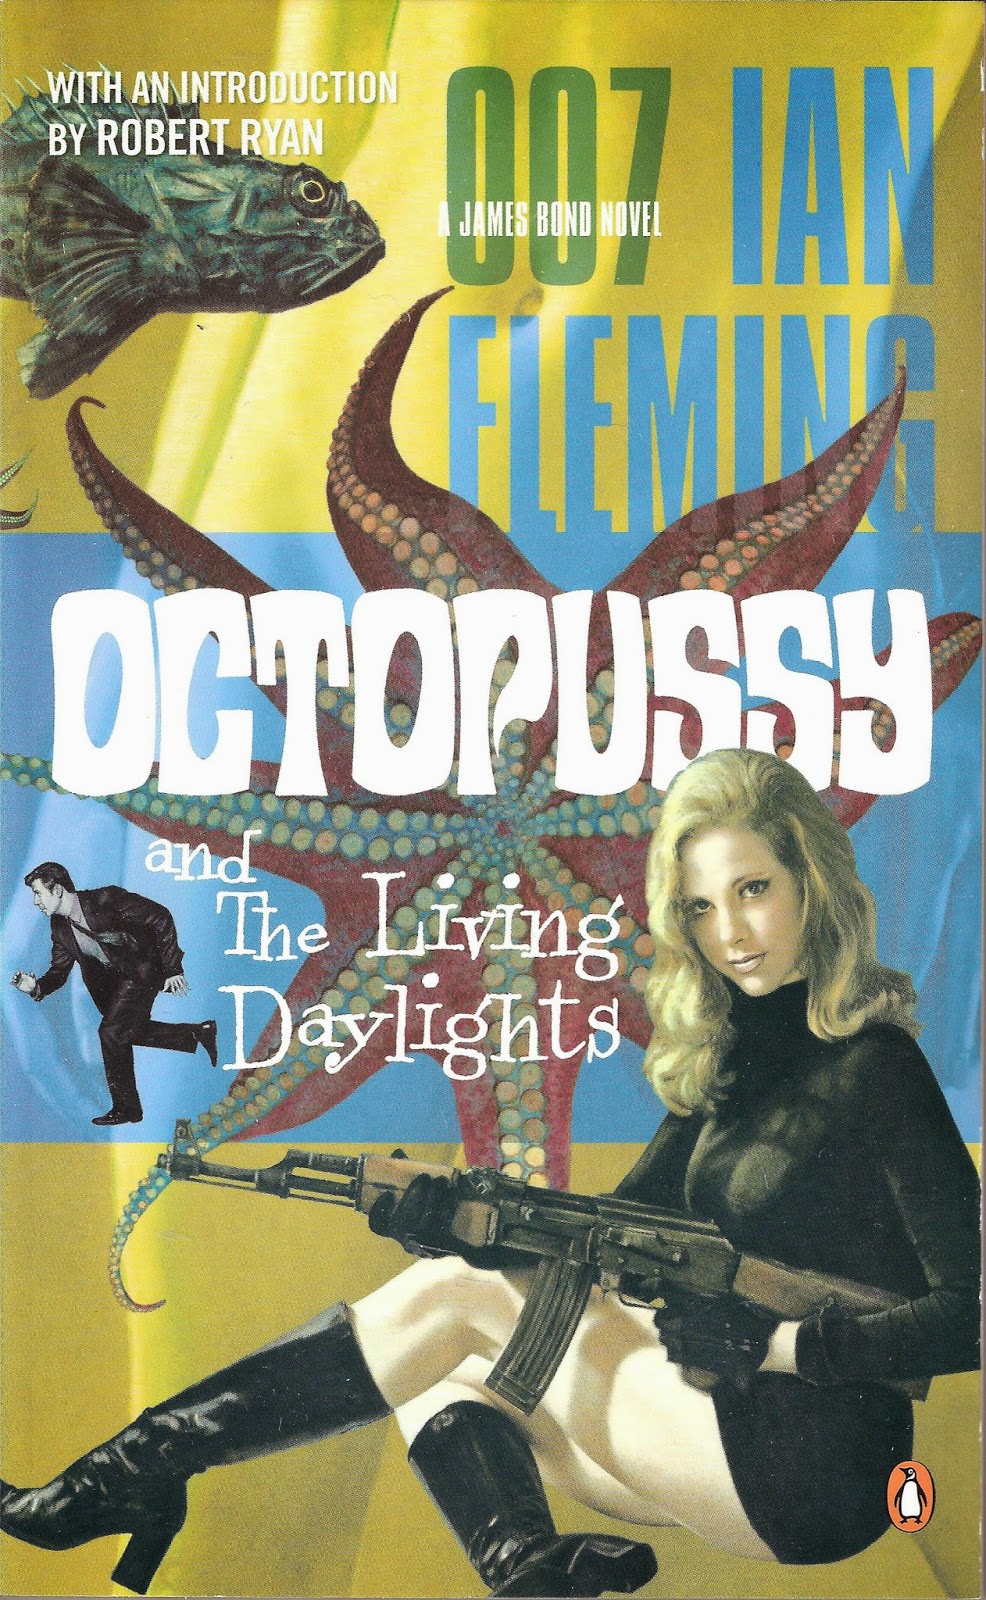 39945212 14 Octopussy and The Living Daylights